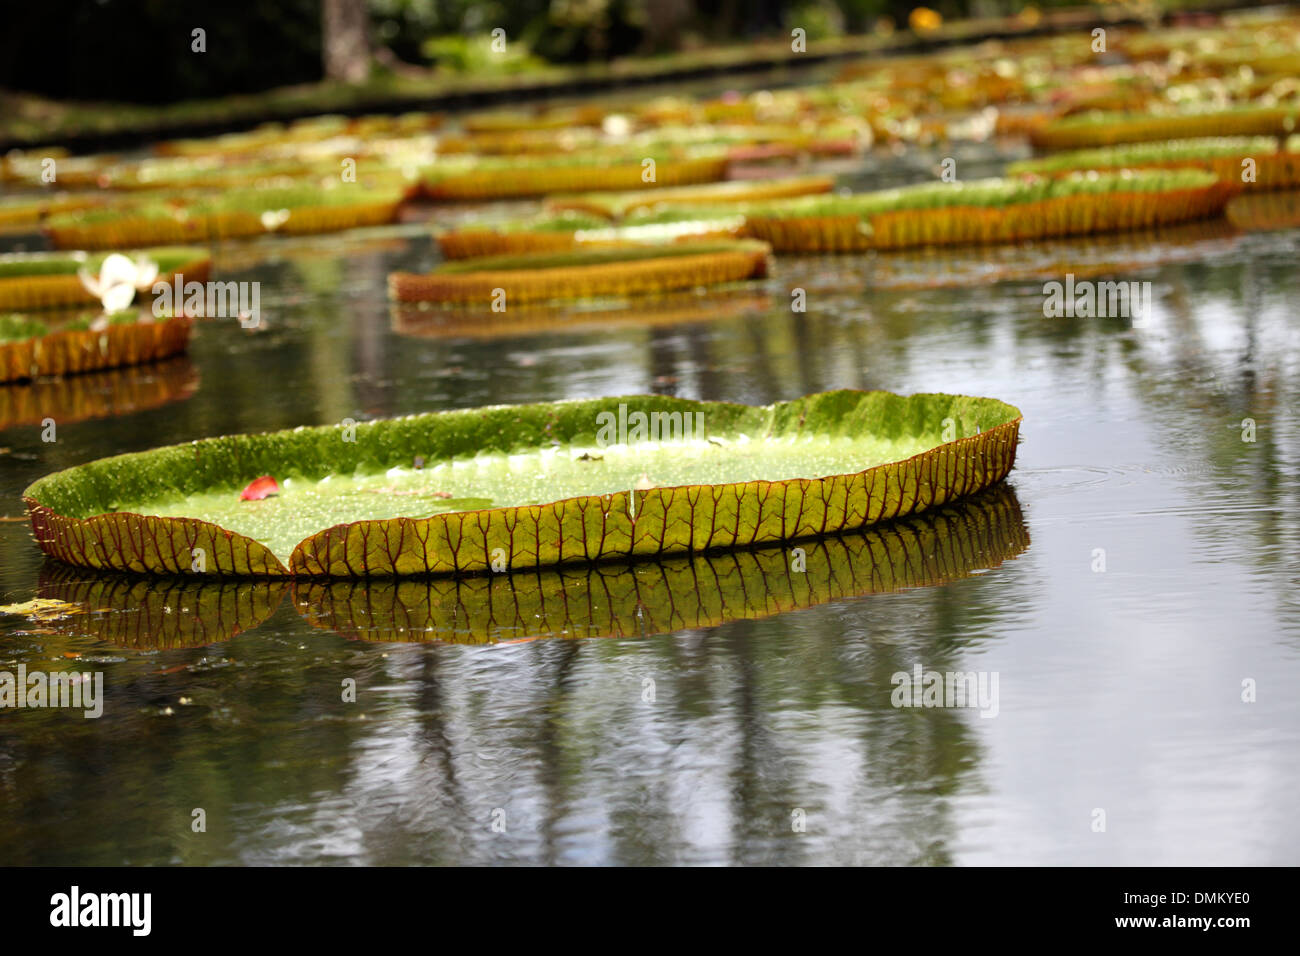 Victoria Amazonica leaves in the bathtub of the Botanical Garden of Pamplemousses in Mauritius island Stock Photo